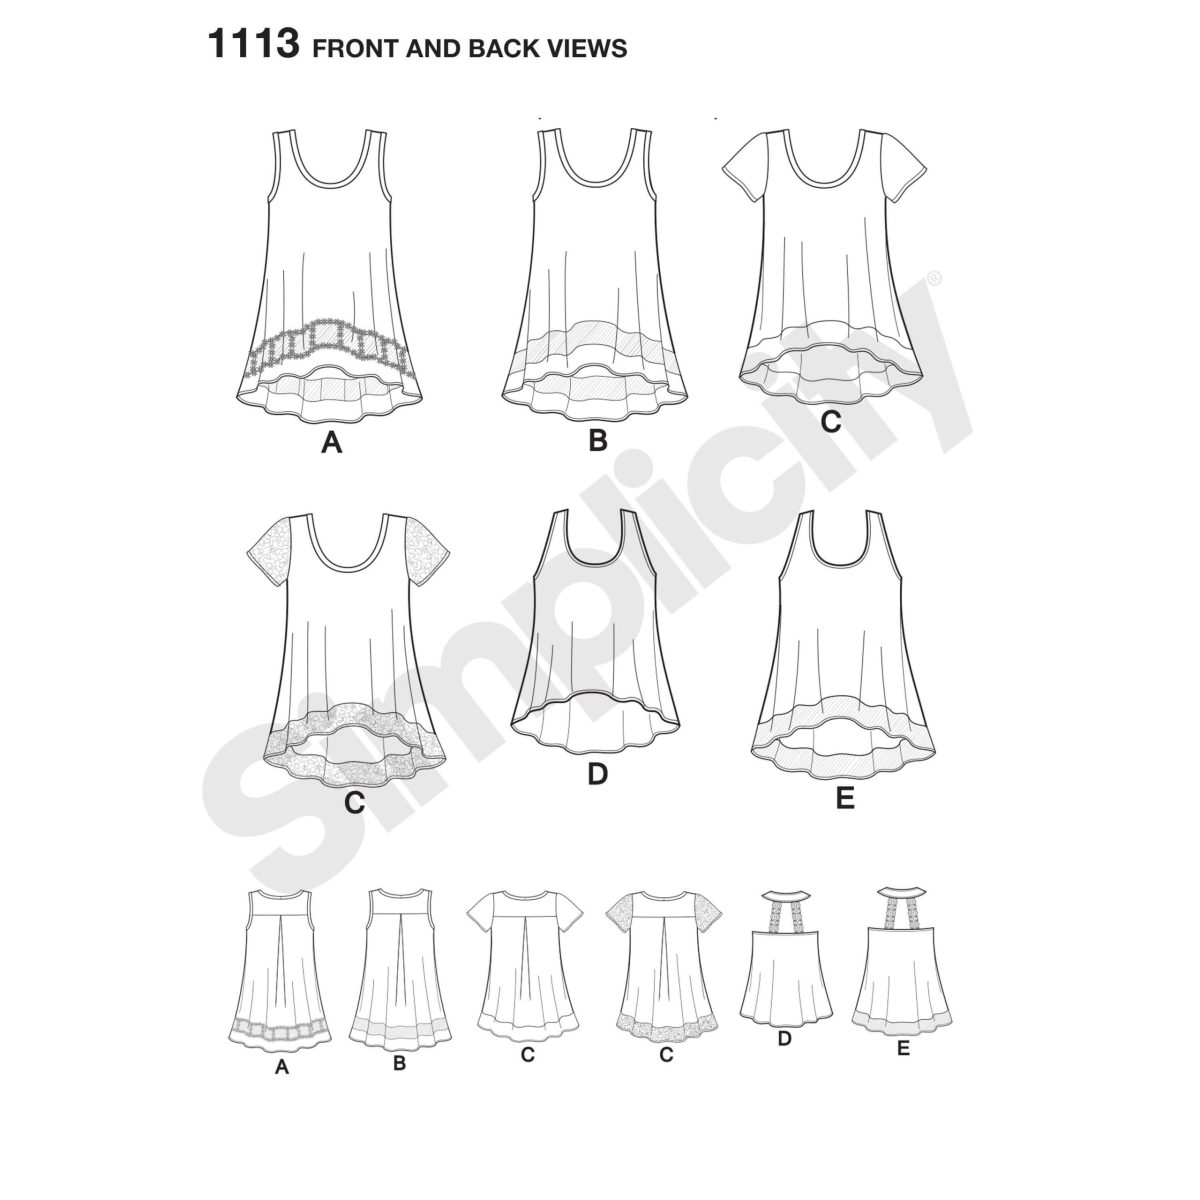 Simplicity Sewing Pattern 1113 Misses' Easy-To-Sew Knit Tops